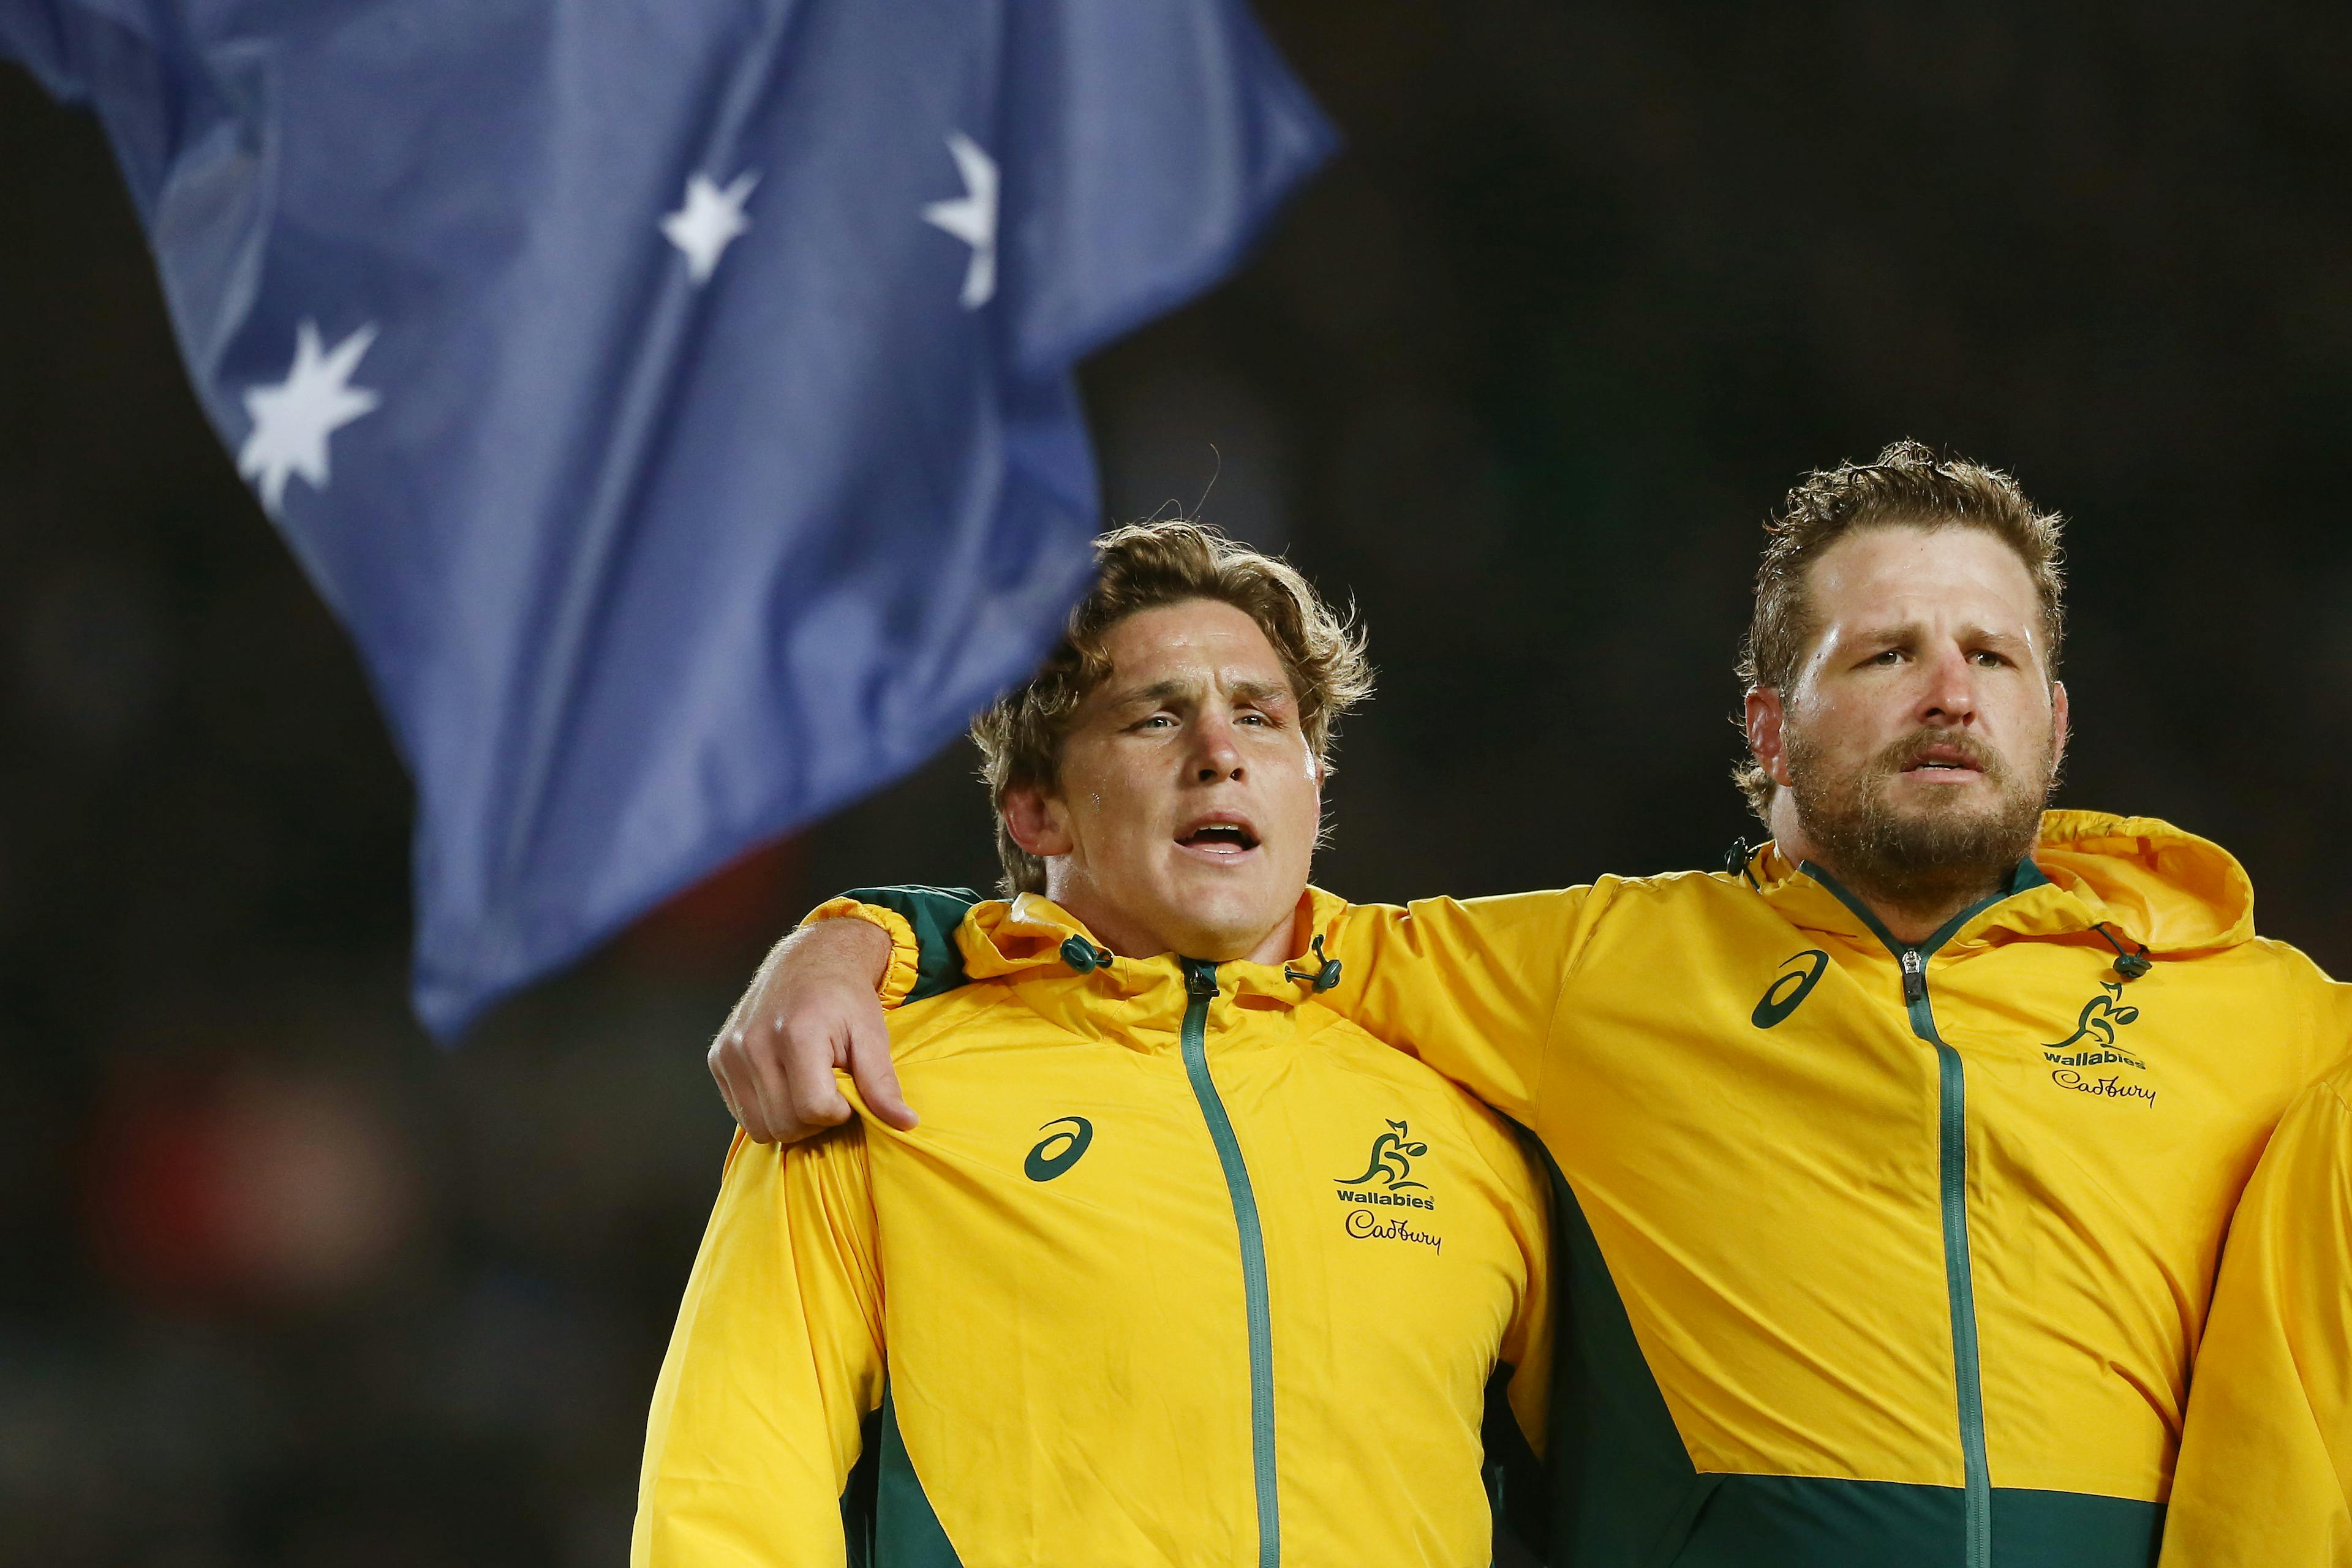 Michael Hooper and James Slipper will co-captain the Wallabies in 2023. Photo: Getty Images